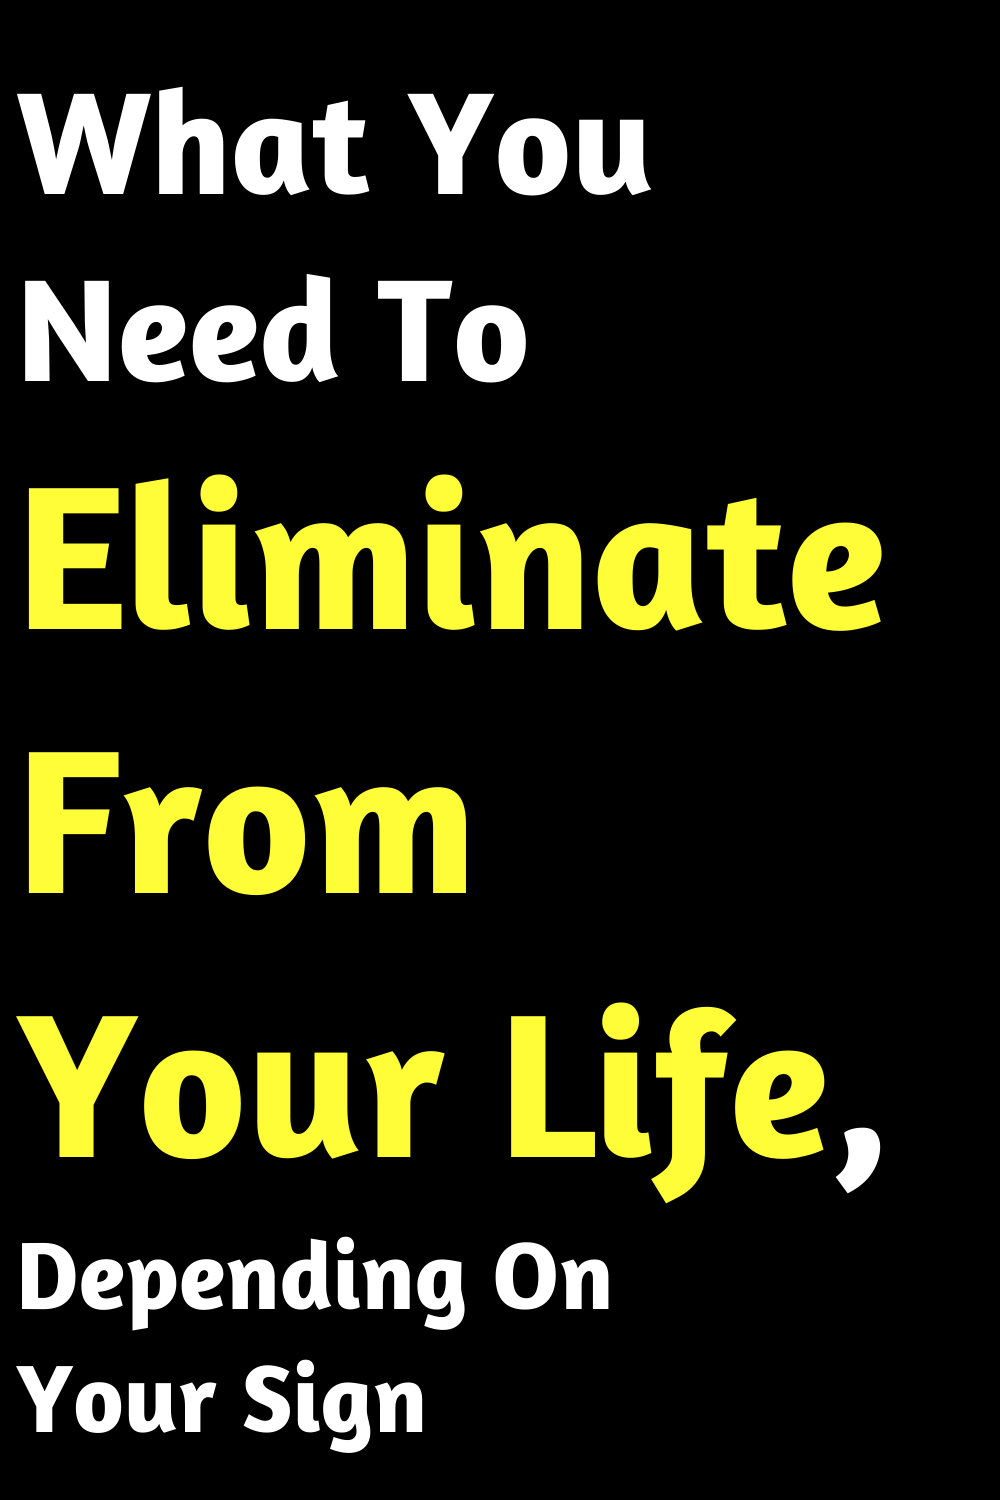 What You Need To Eliminate From Your Life, Depending On Your Sign